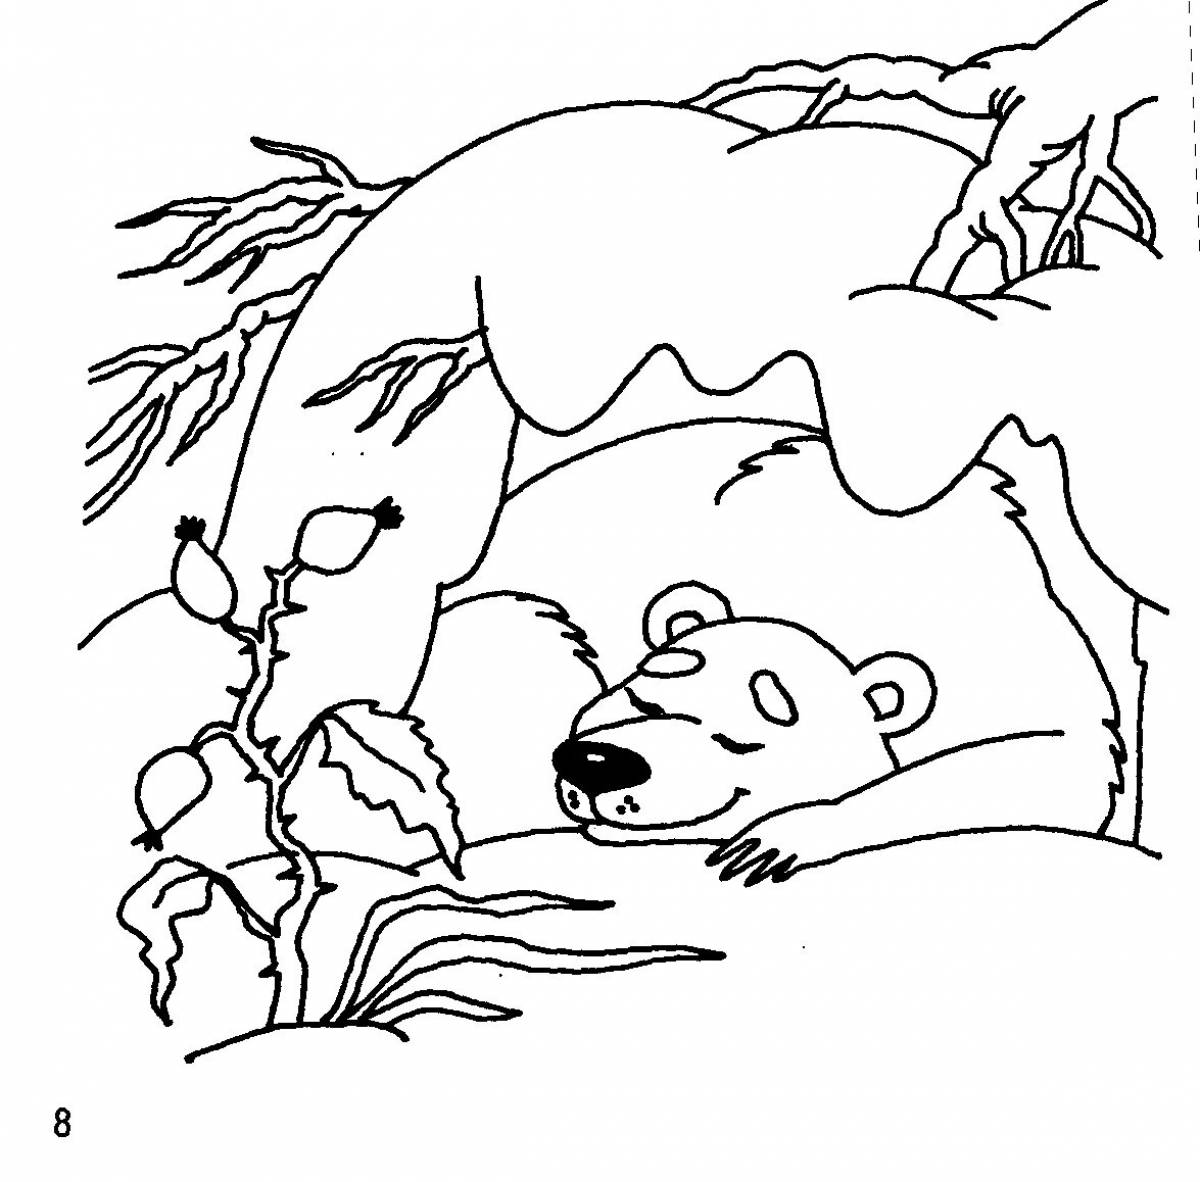 Coloring book snowman bear in winter